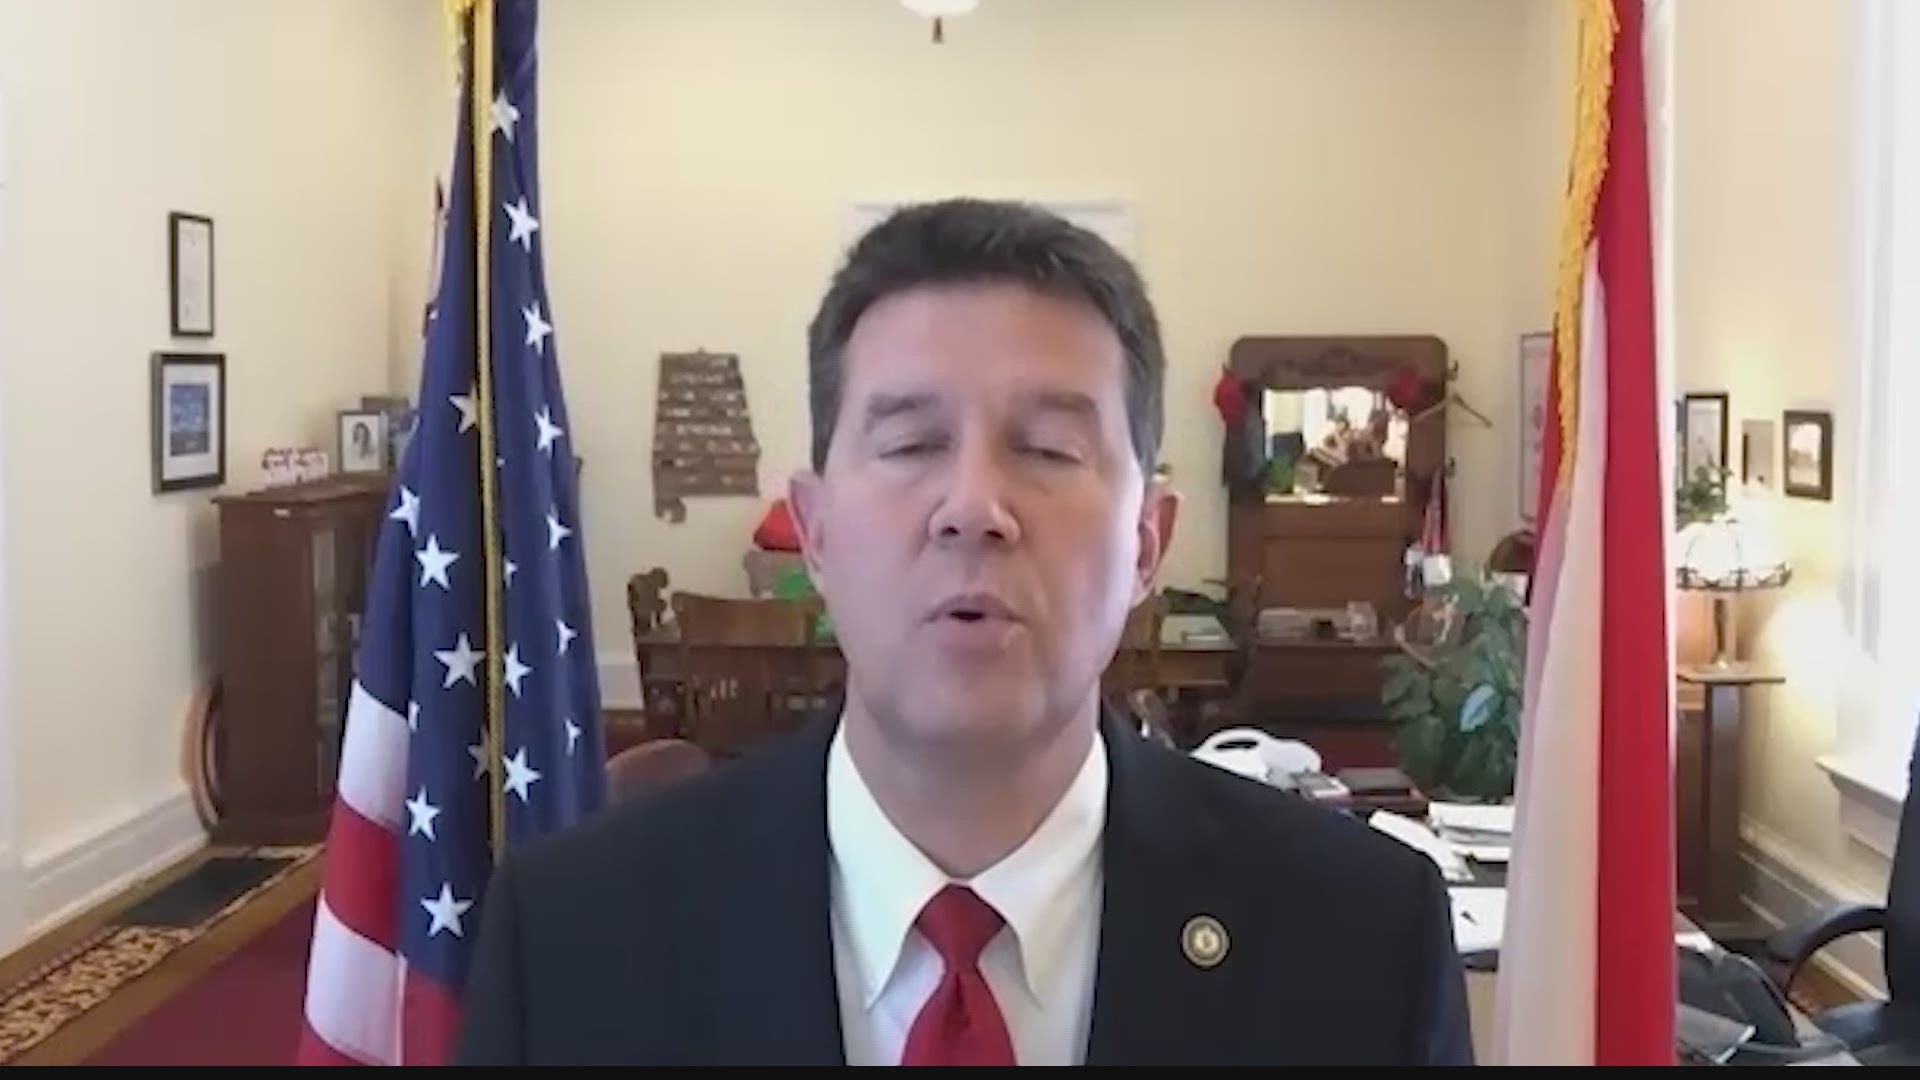 Alabama Secretary of State John Merrill spoke about voter participation in the 2020 election.